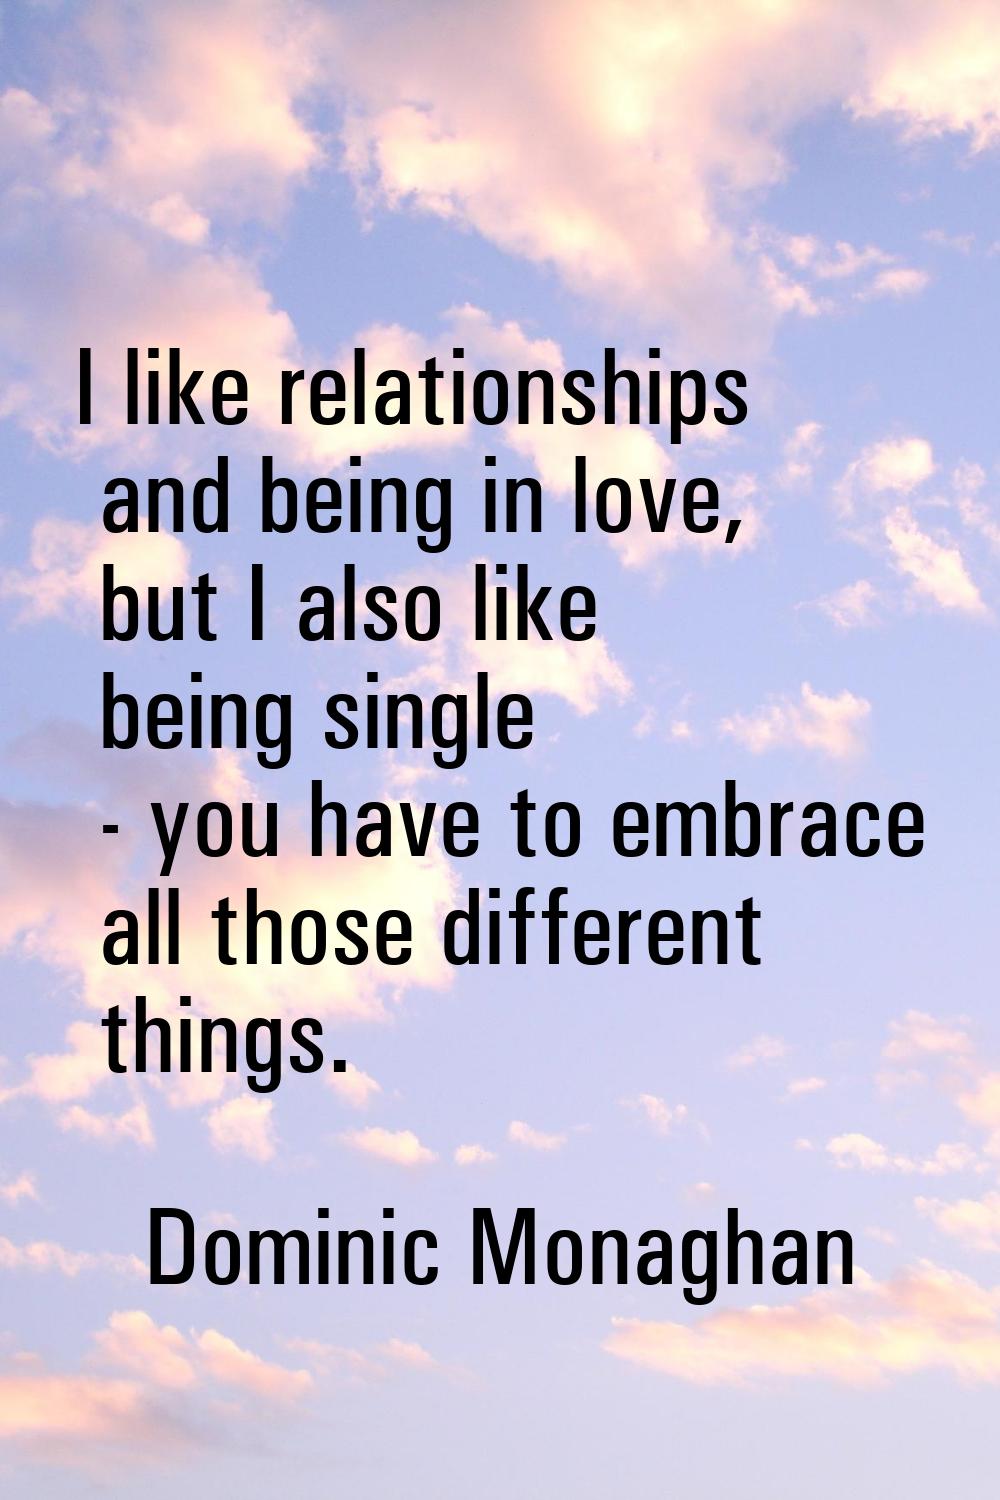 I like relationships and being in love, but I also like being single - you have to embrace all thos